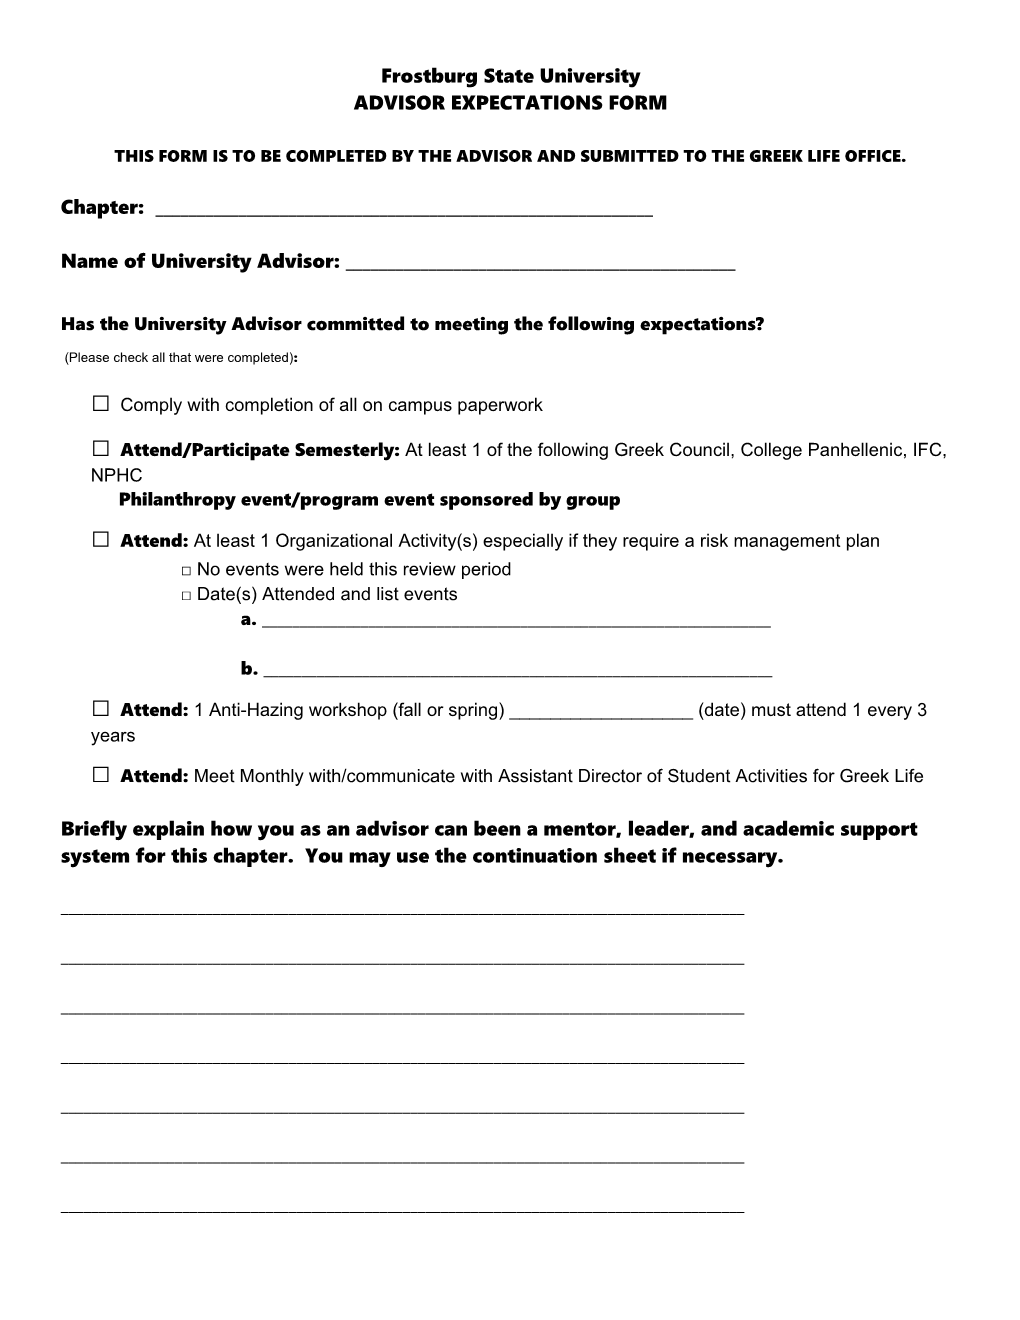 This Form Is to Be Completed by the Advisor and Submitted to the Greek Life Office